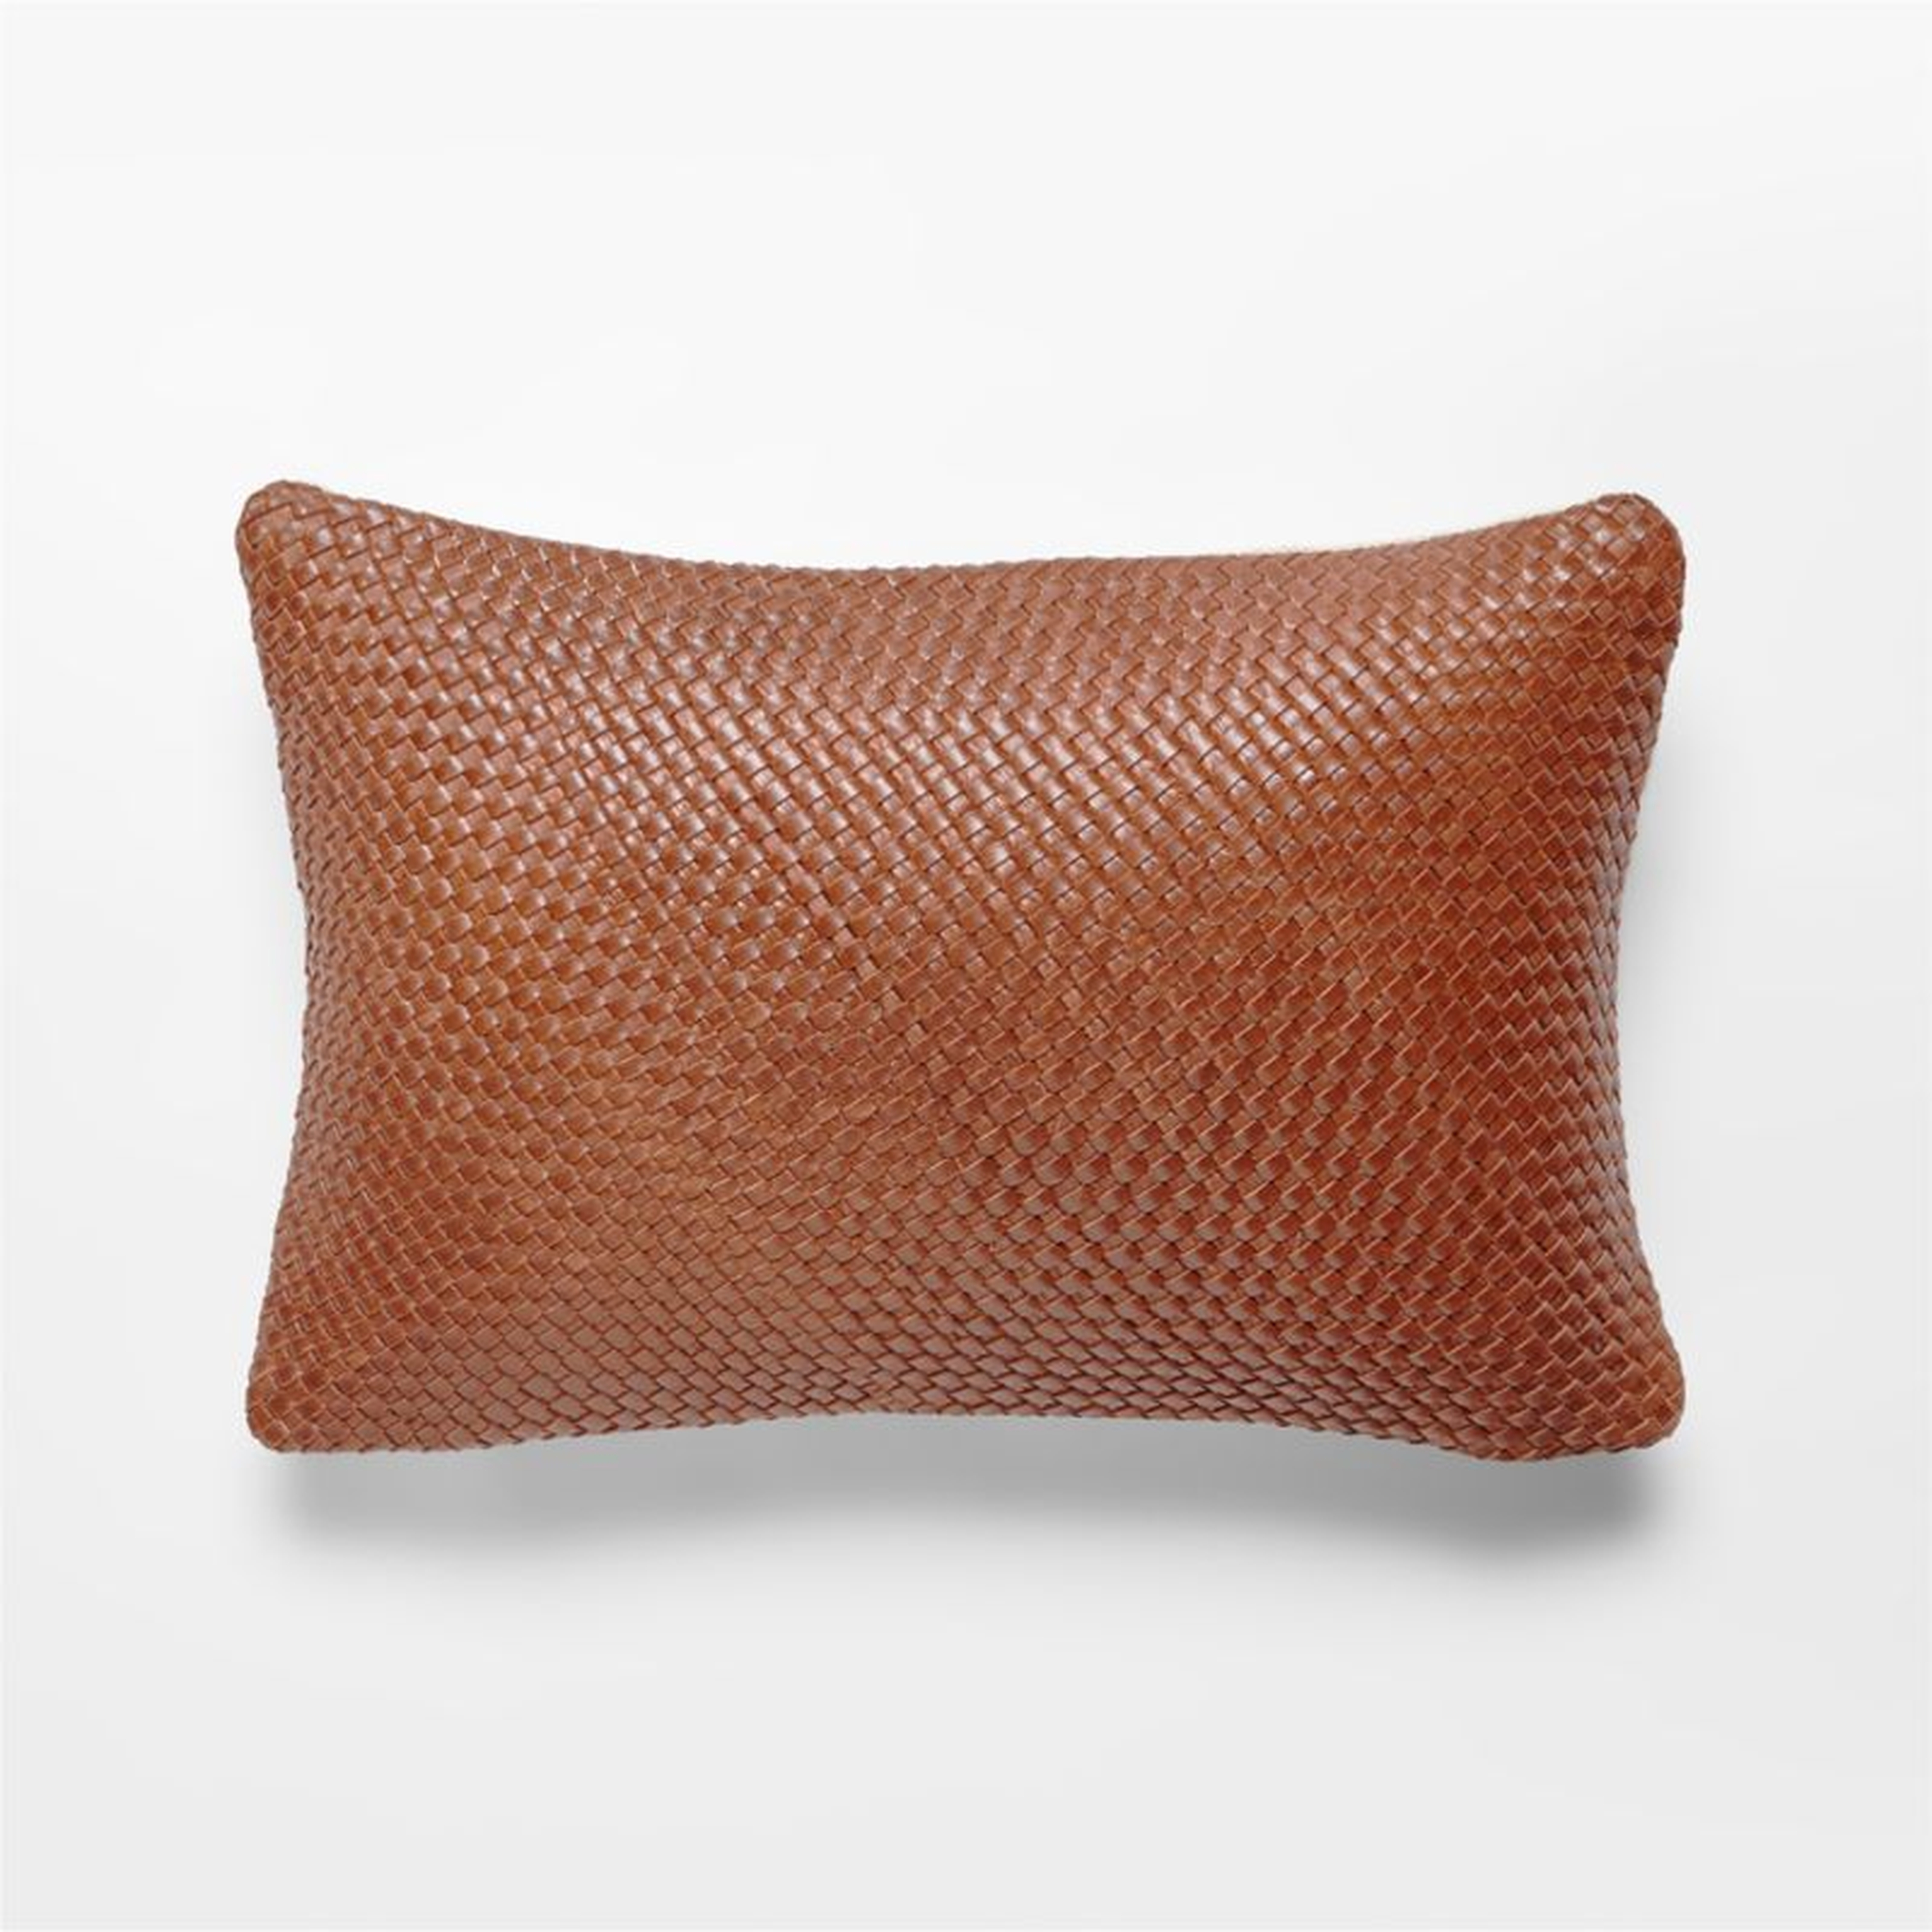 Route Leather Pillow, Feather-Down Insert, Chocolate, 18"x12" - CB2